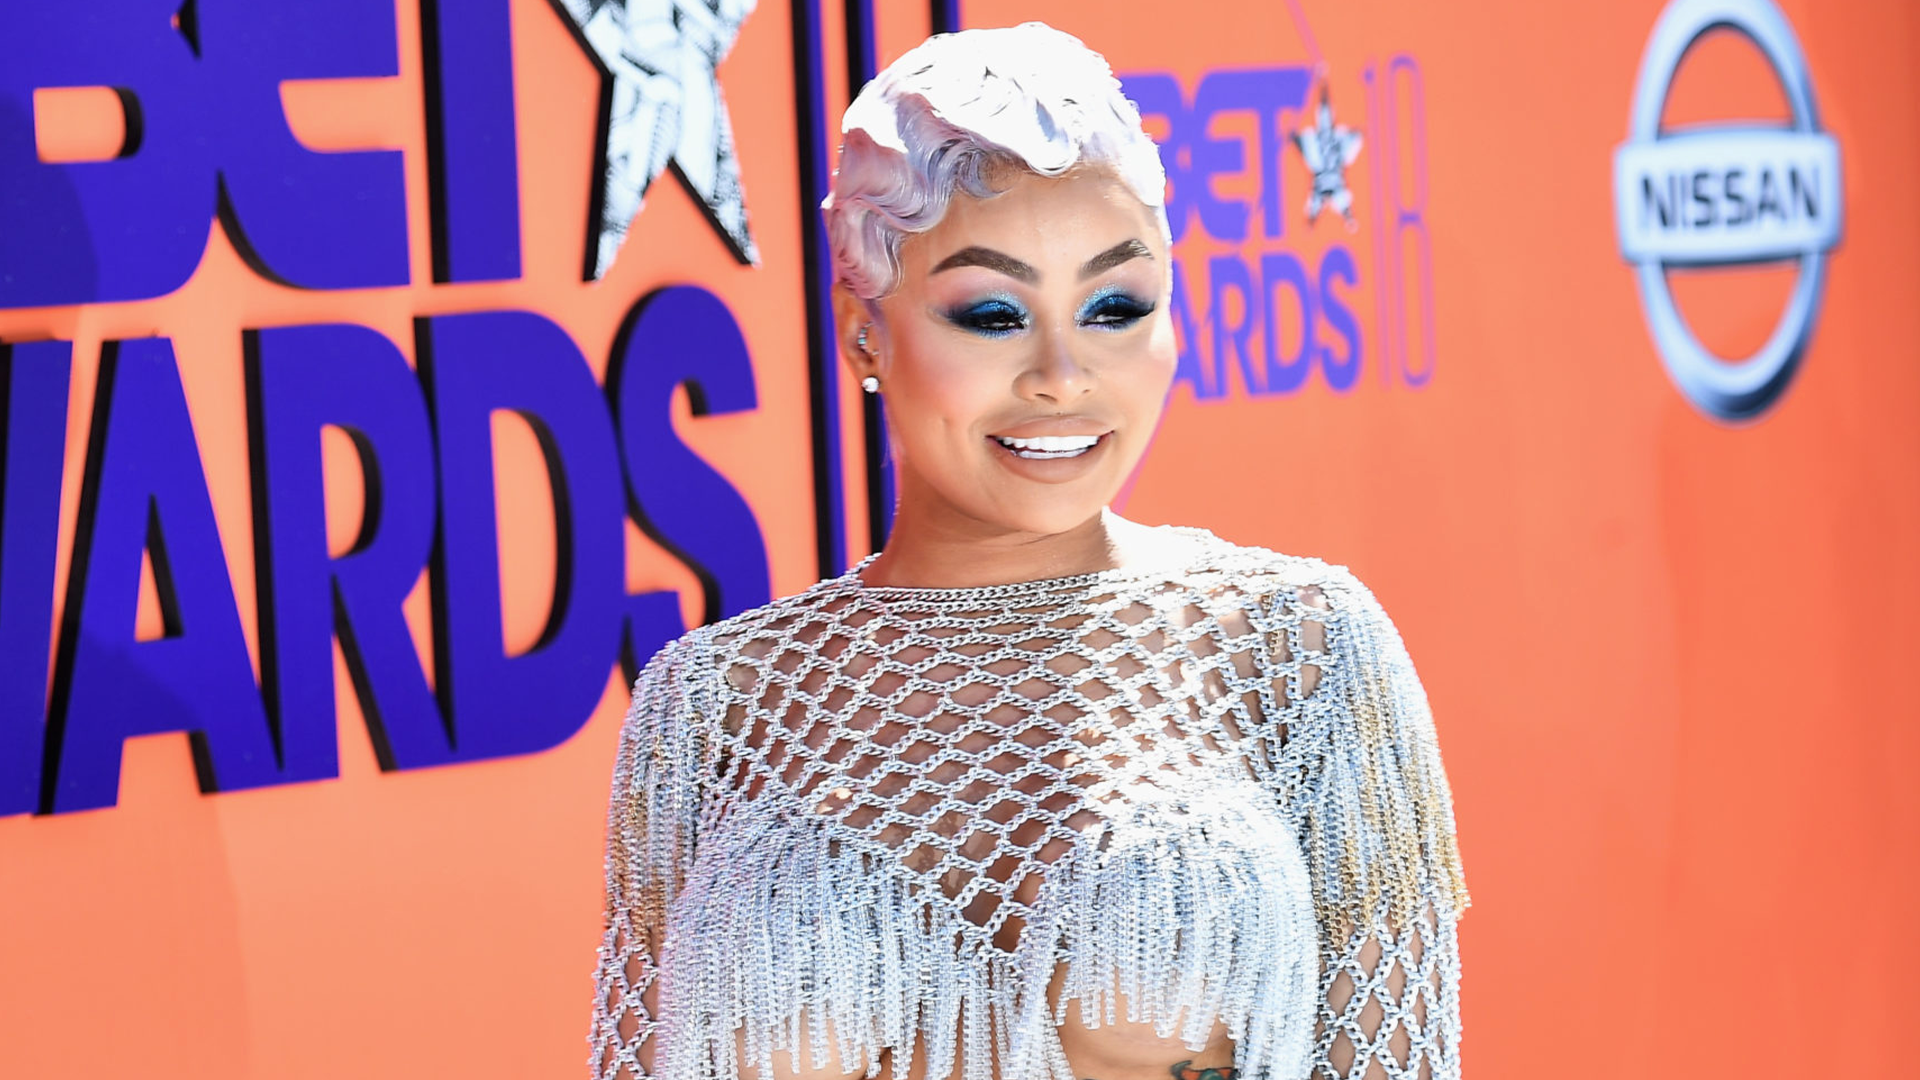 10 Things We Know About Blac Chyna's Various Business Moves